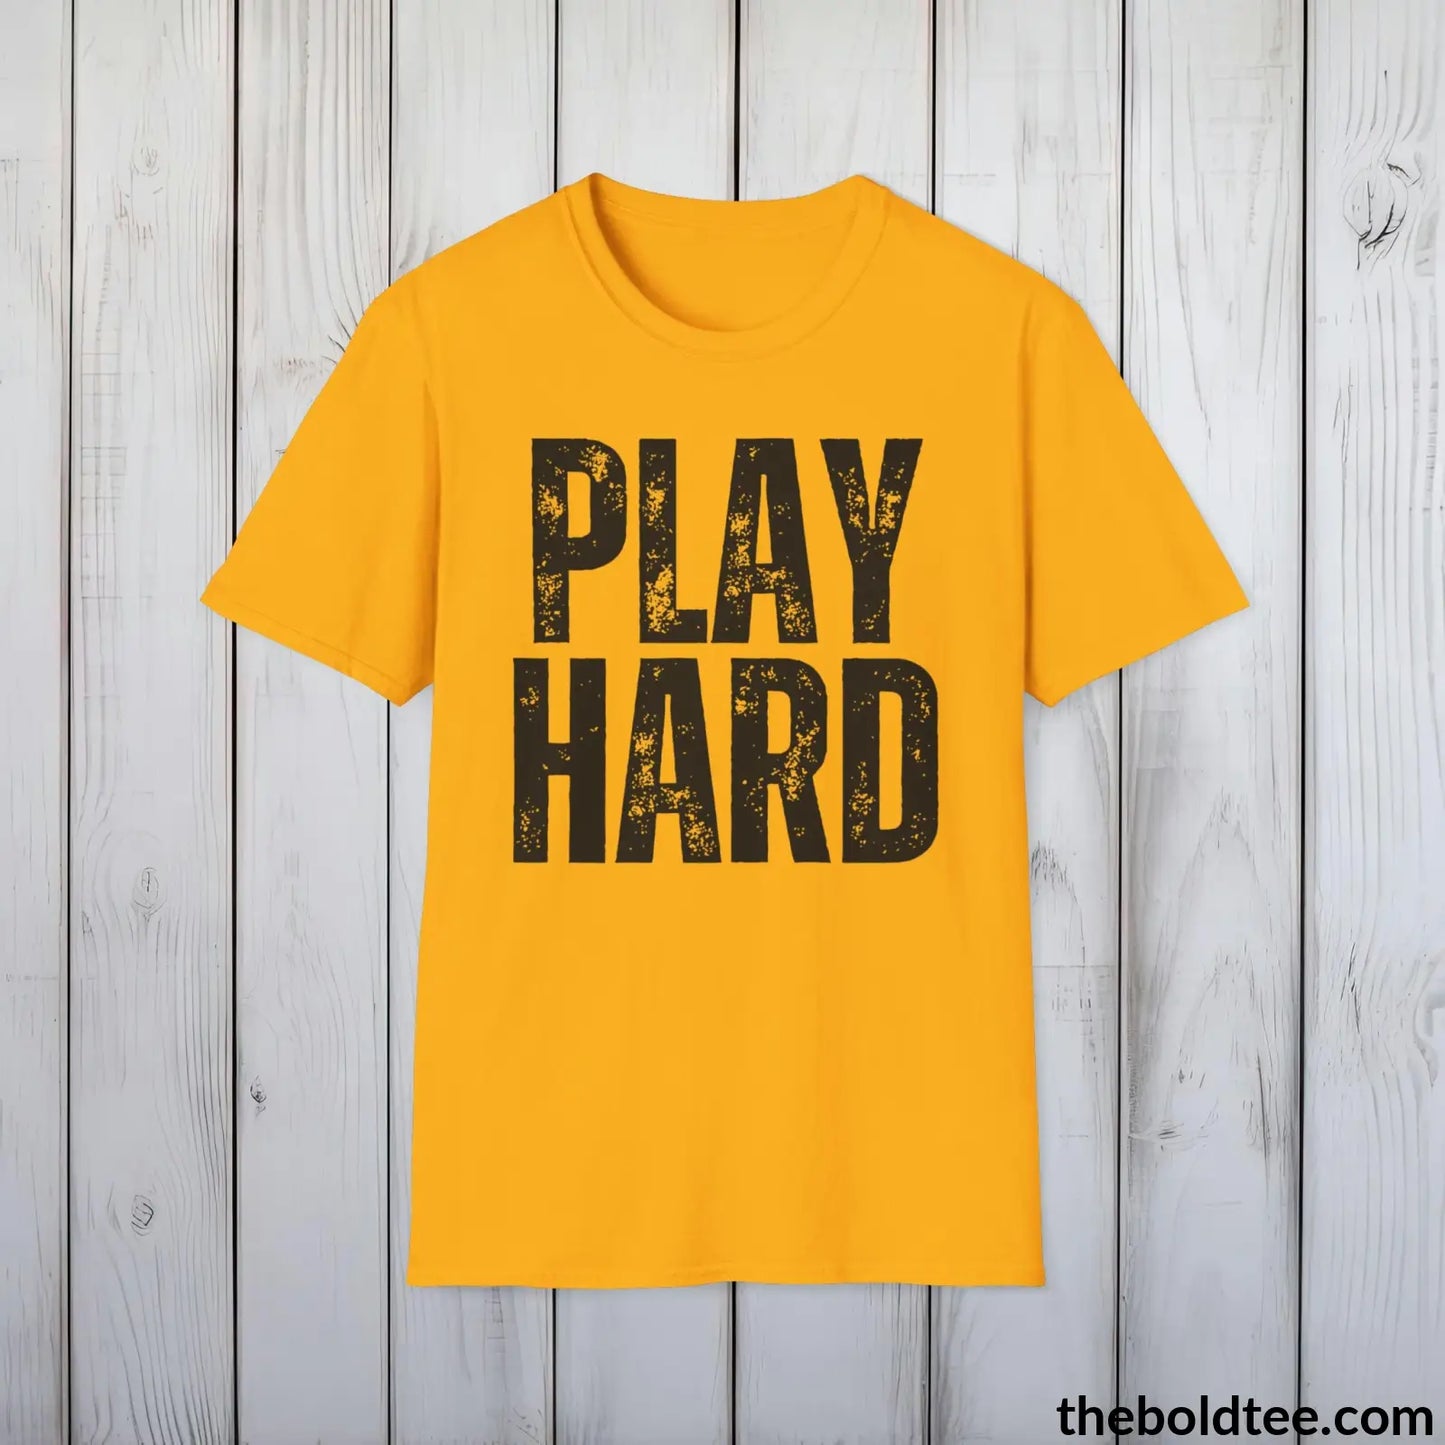 T-Shirt Gold / S PLAY HARD Basketball Tee - Sustainable & Soft Cotton Crewneck Unisex T-Shirt - 9 Bold Colors